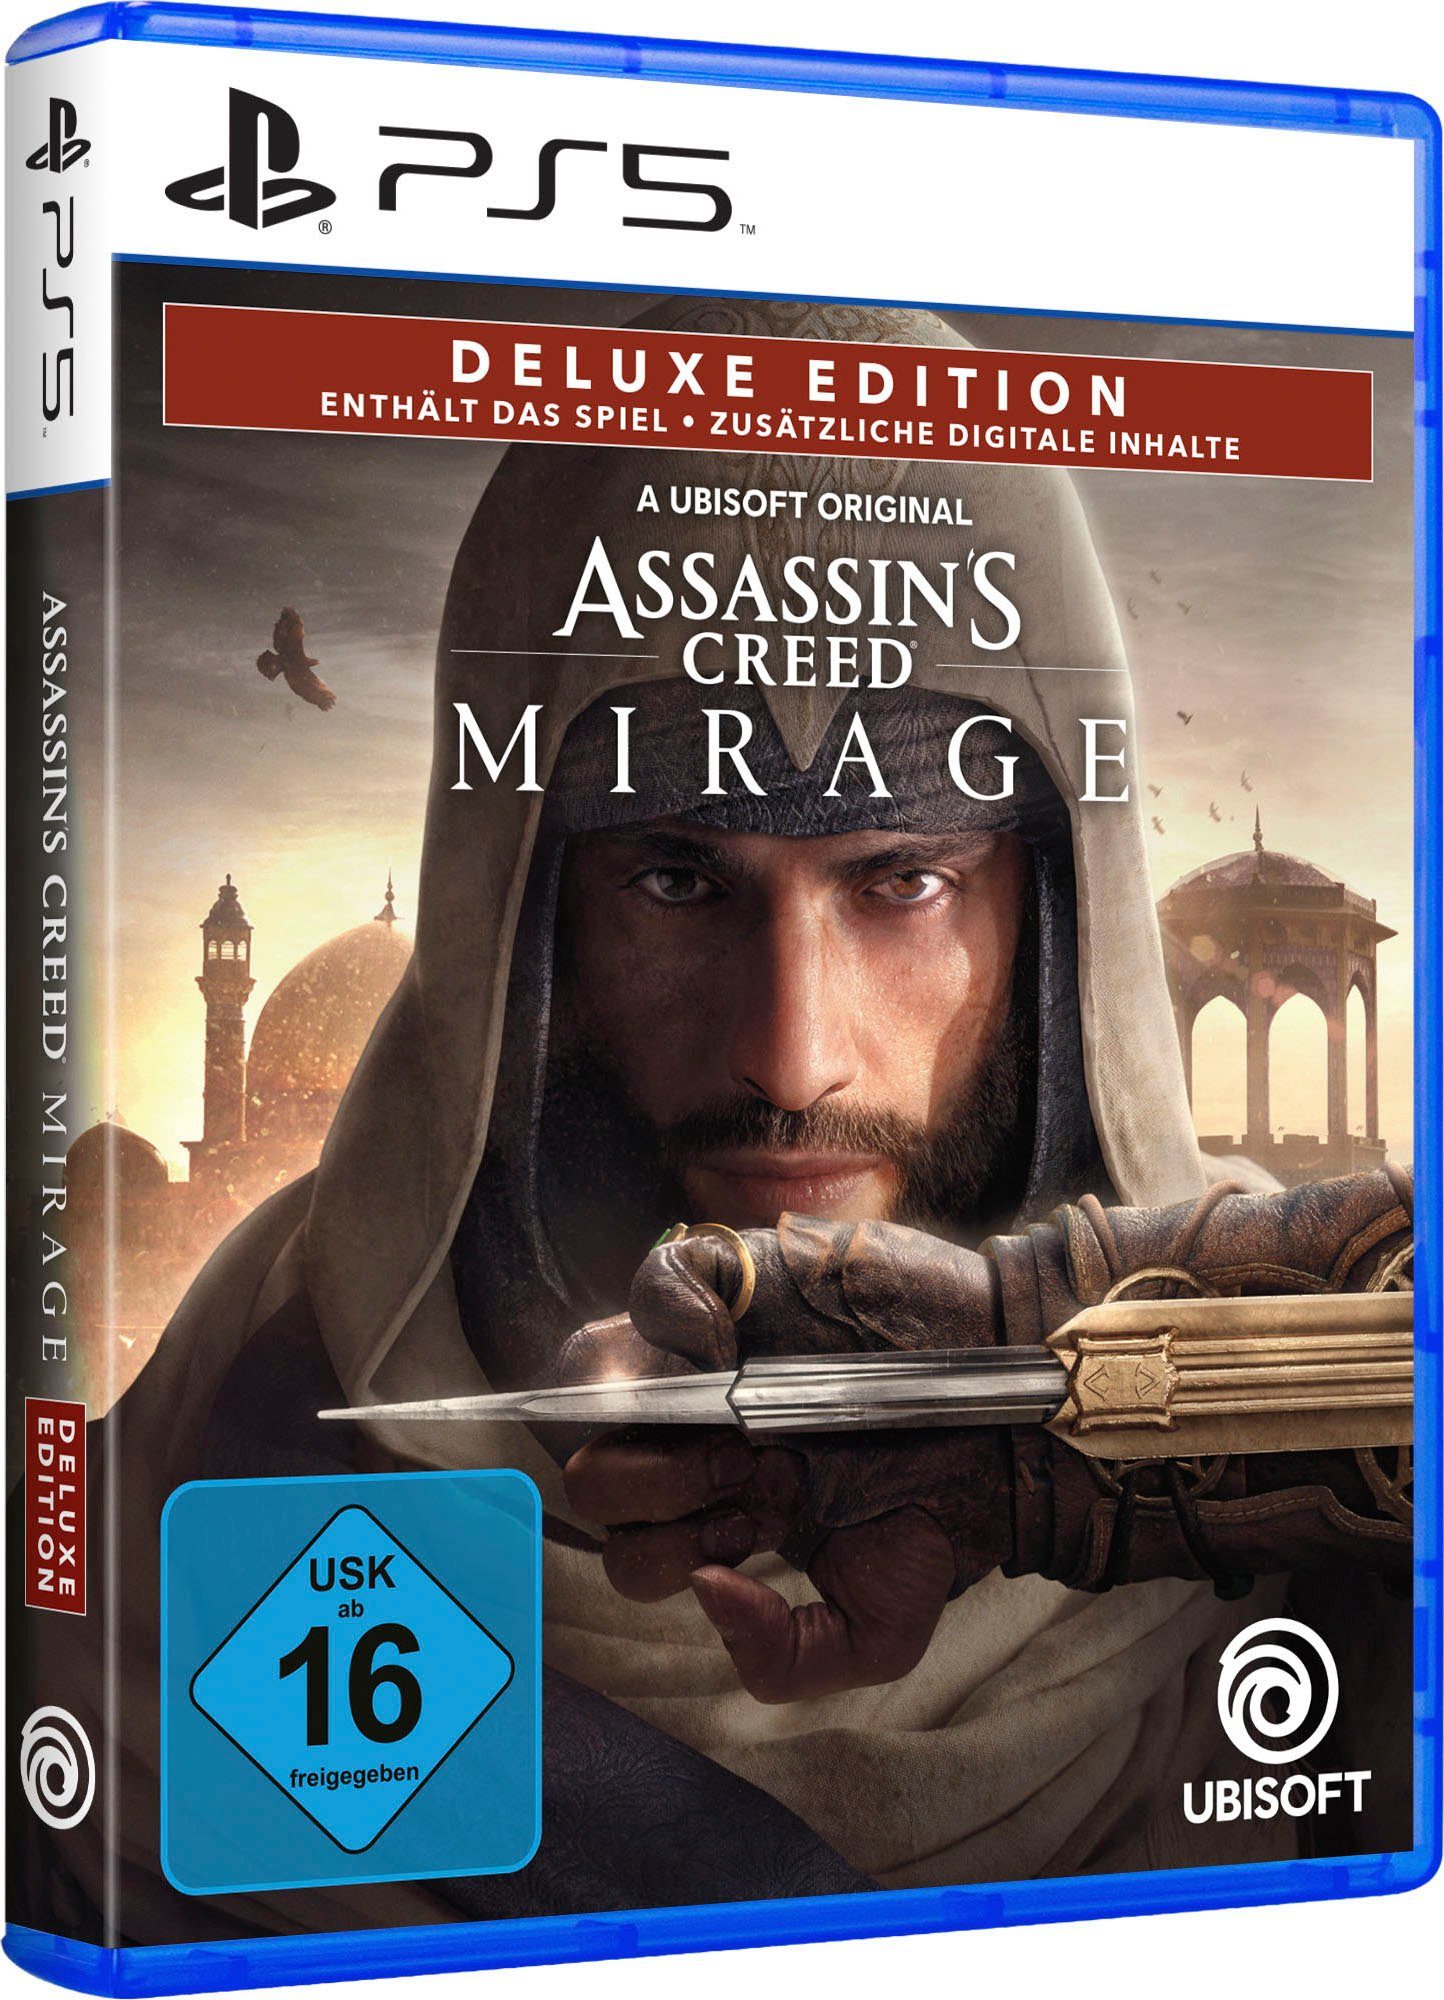 UBISOFT Assassin's Creed Mirage Deluxe Edition - PlayStation 5